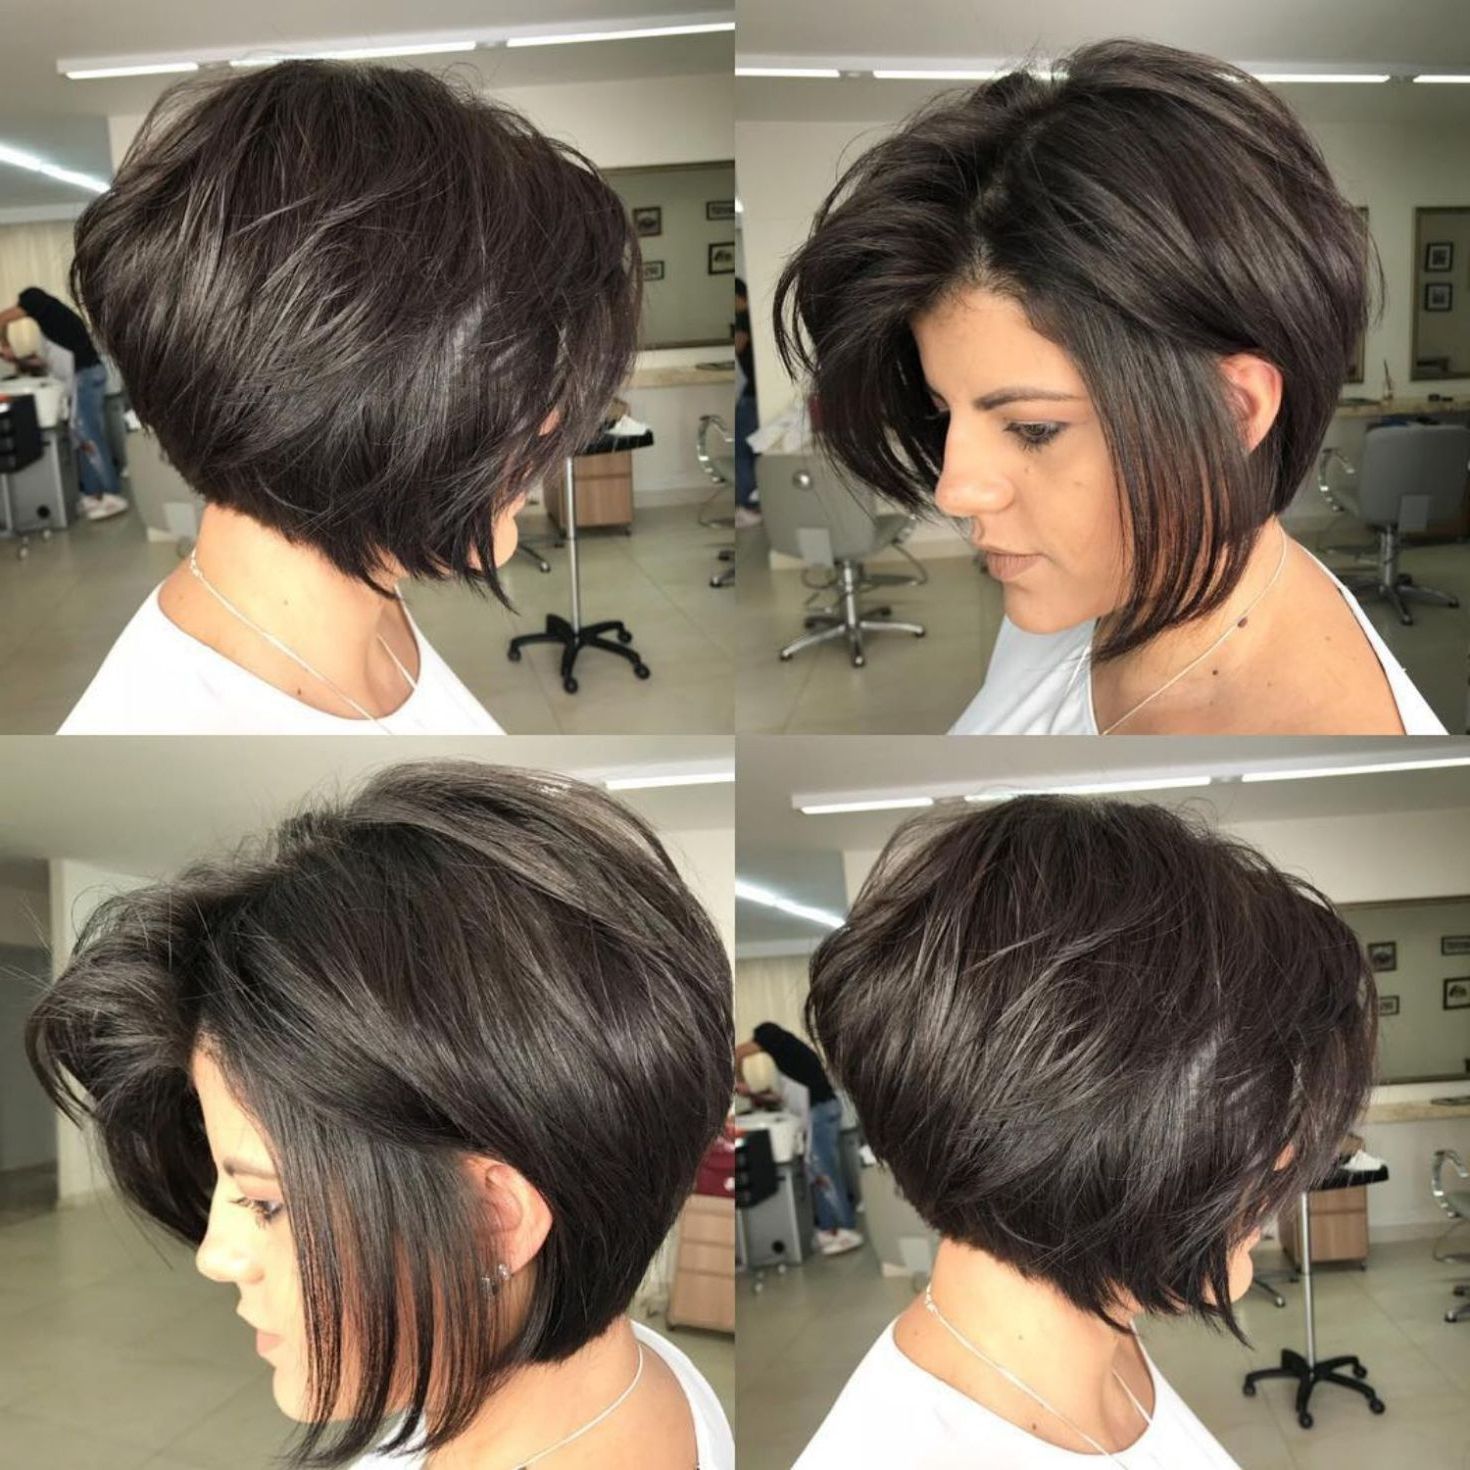 Hairstyles : Short Layered Bob Hairstyles 40 Inspiration 50 Within Well Liked Elongated Bob Asian Hairstyles (View 16 of 20)